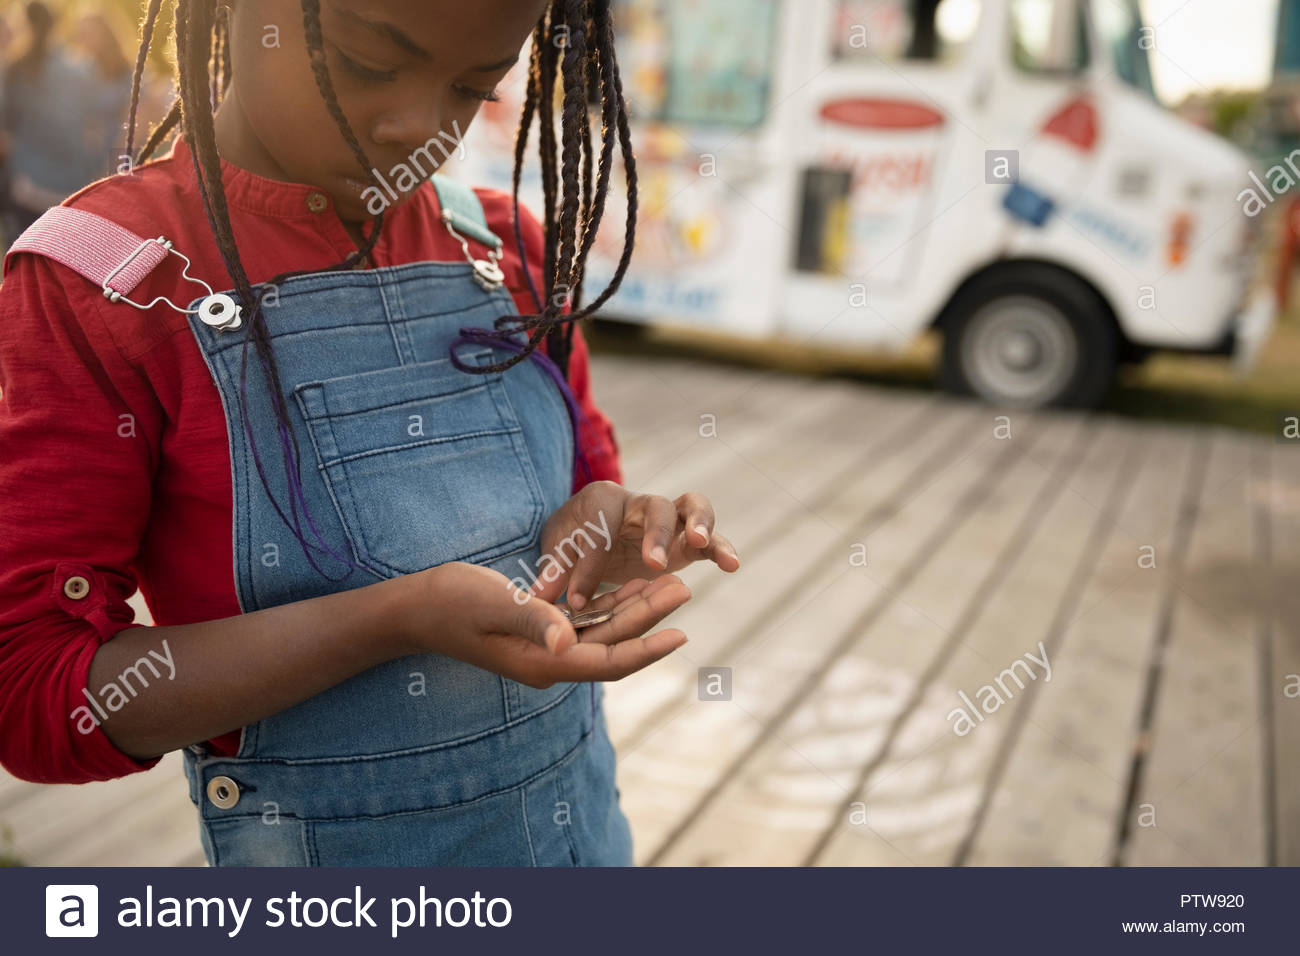 Cute girl counting coins outside ice cream truck Stock Photo